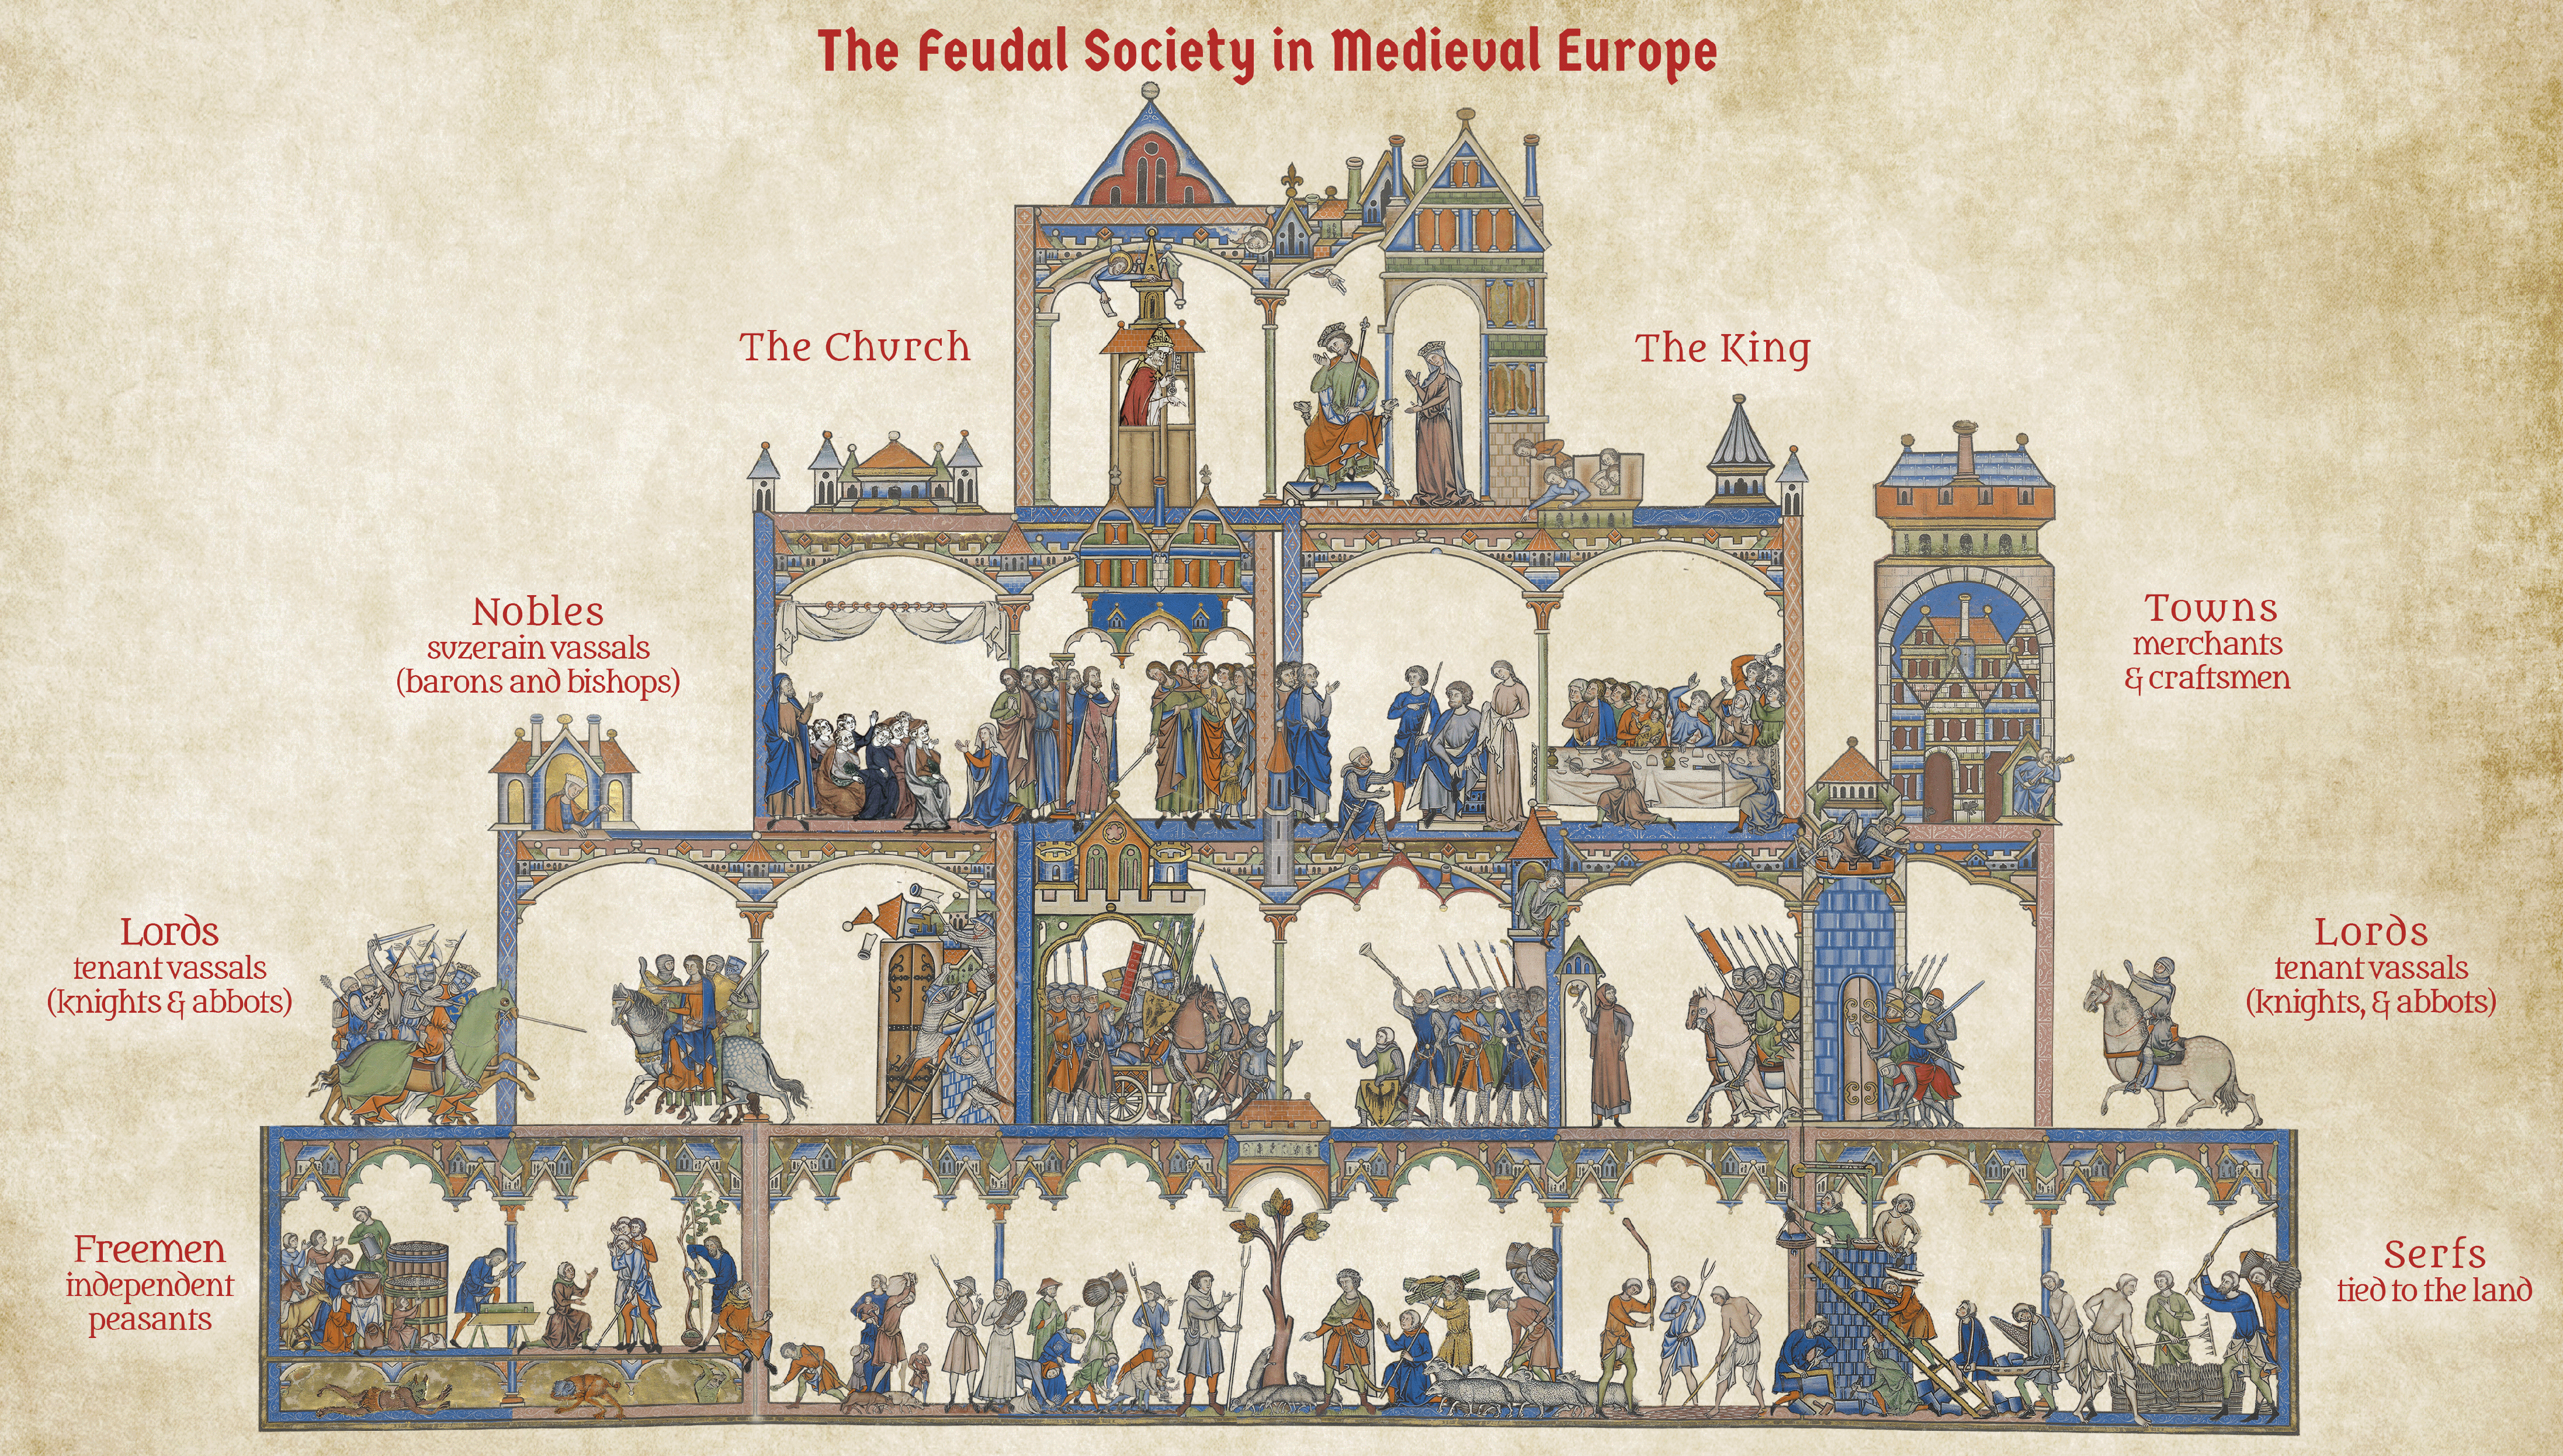 The feudal society in medieval Europe.